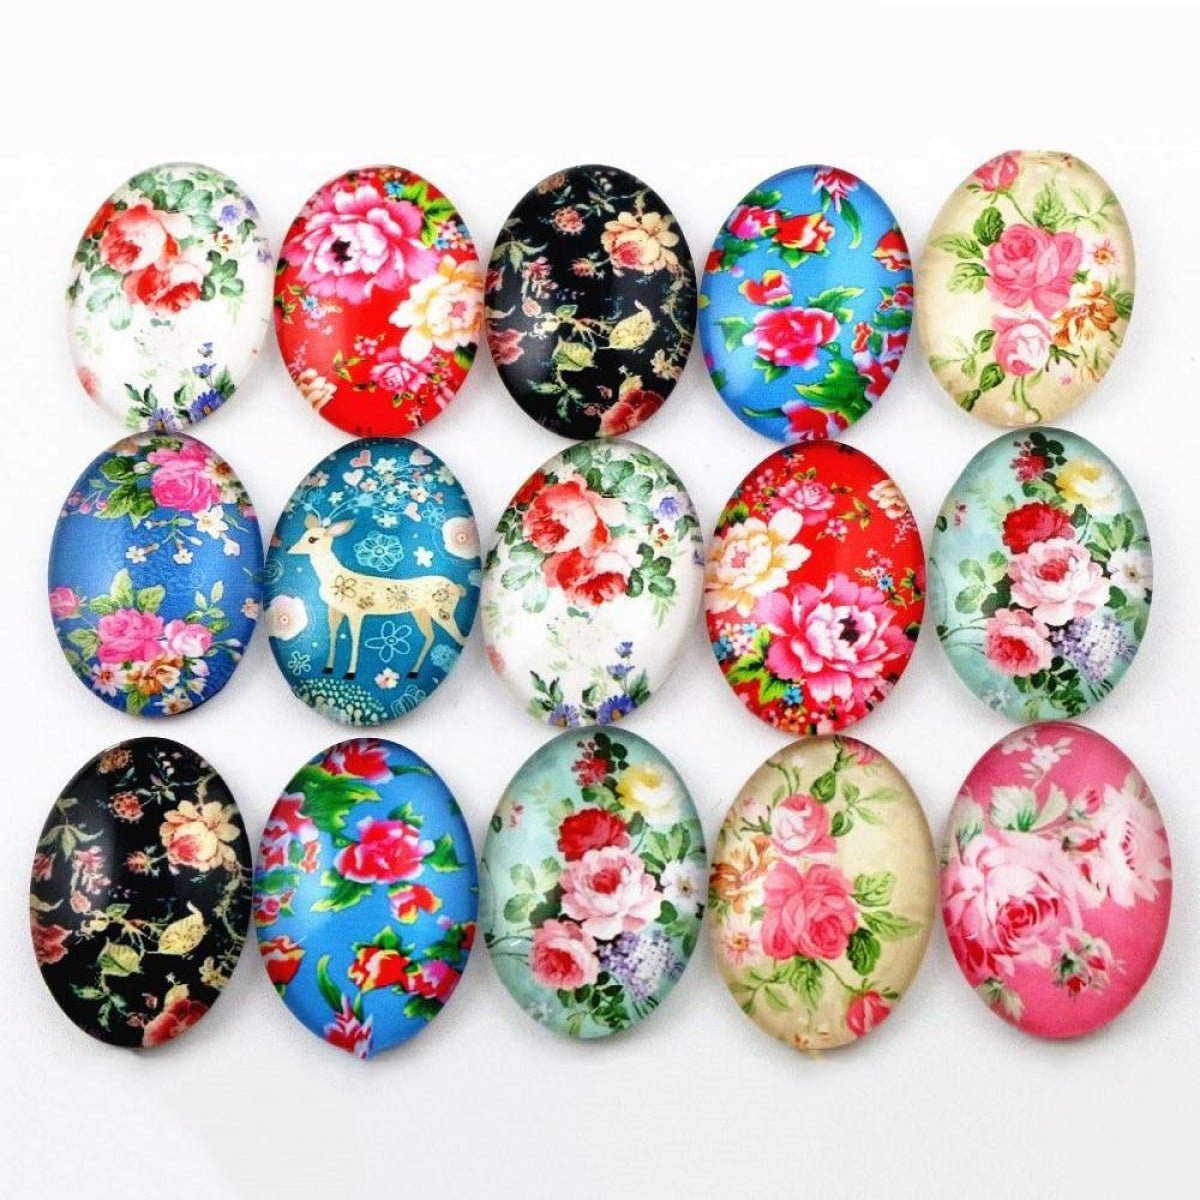 10pcs Glass Cabochons Flower Tree Life Handmade Oval Shape 18x25mm Jewellery Accessories - FLOWERS 3 - - Asia Sell